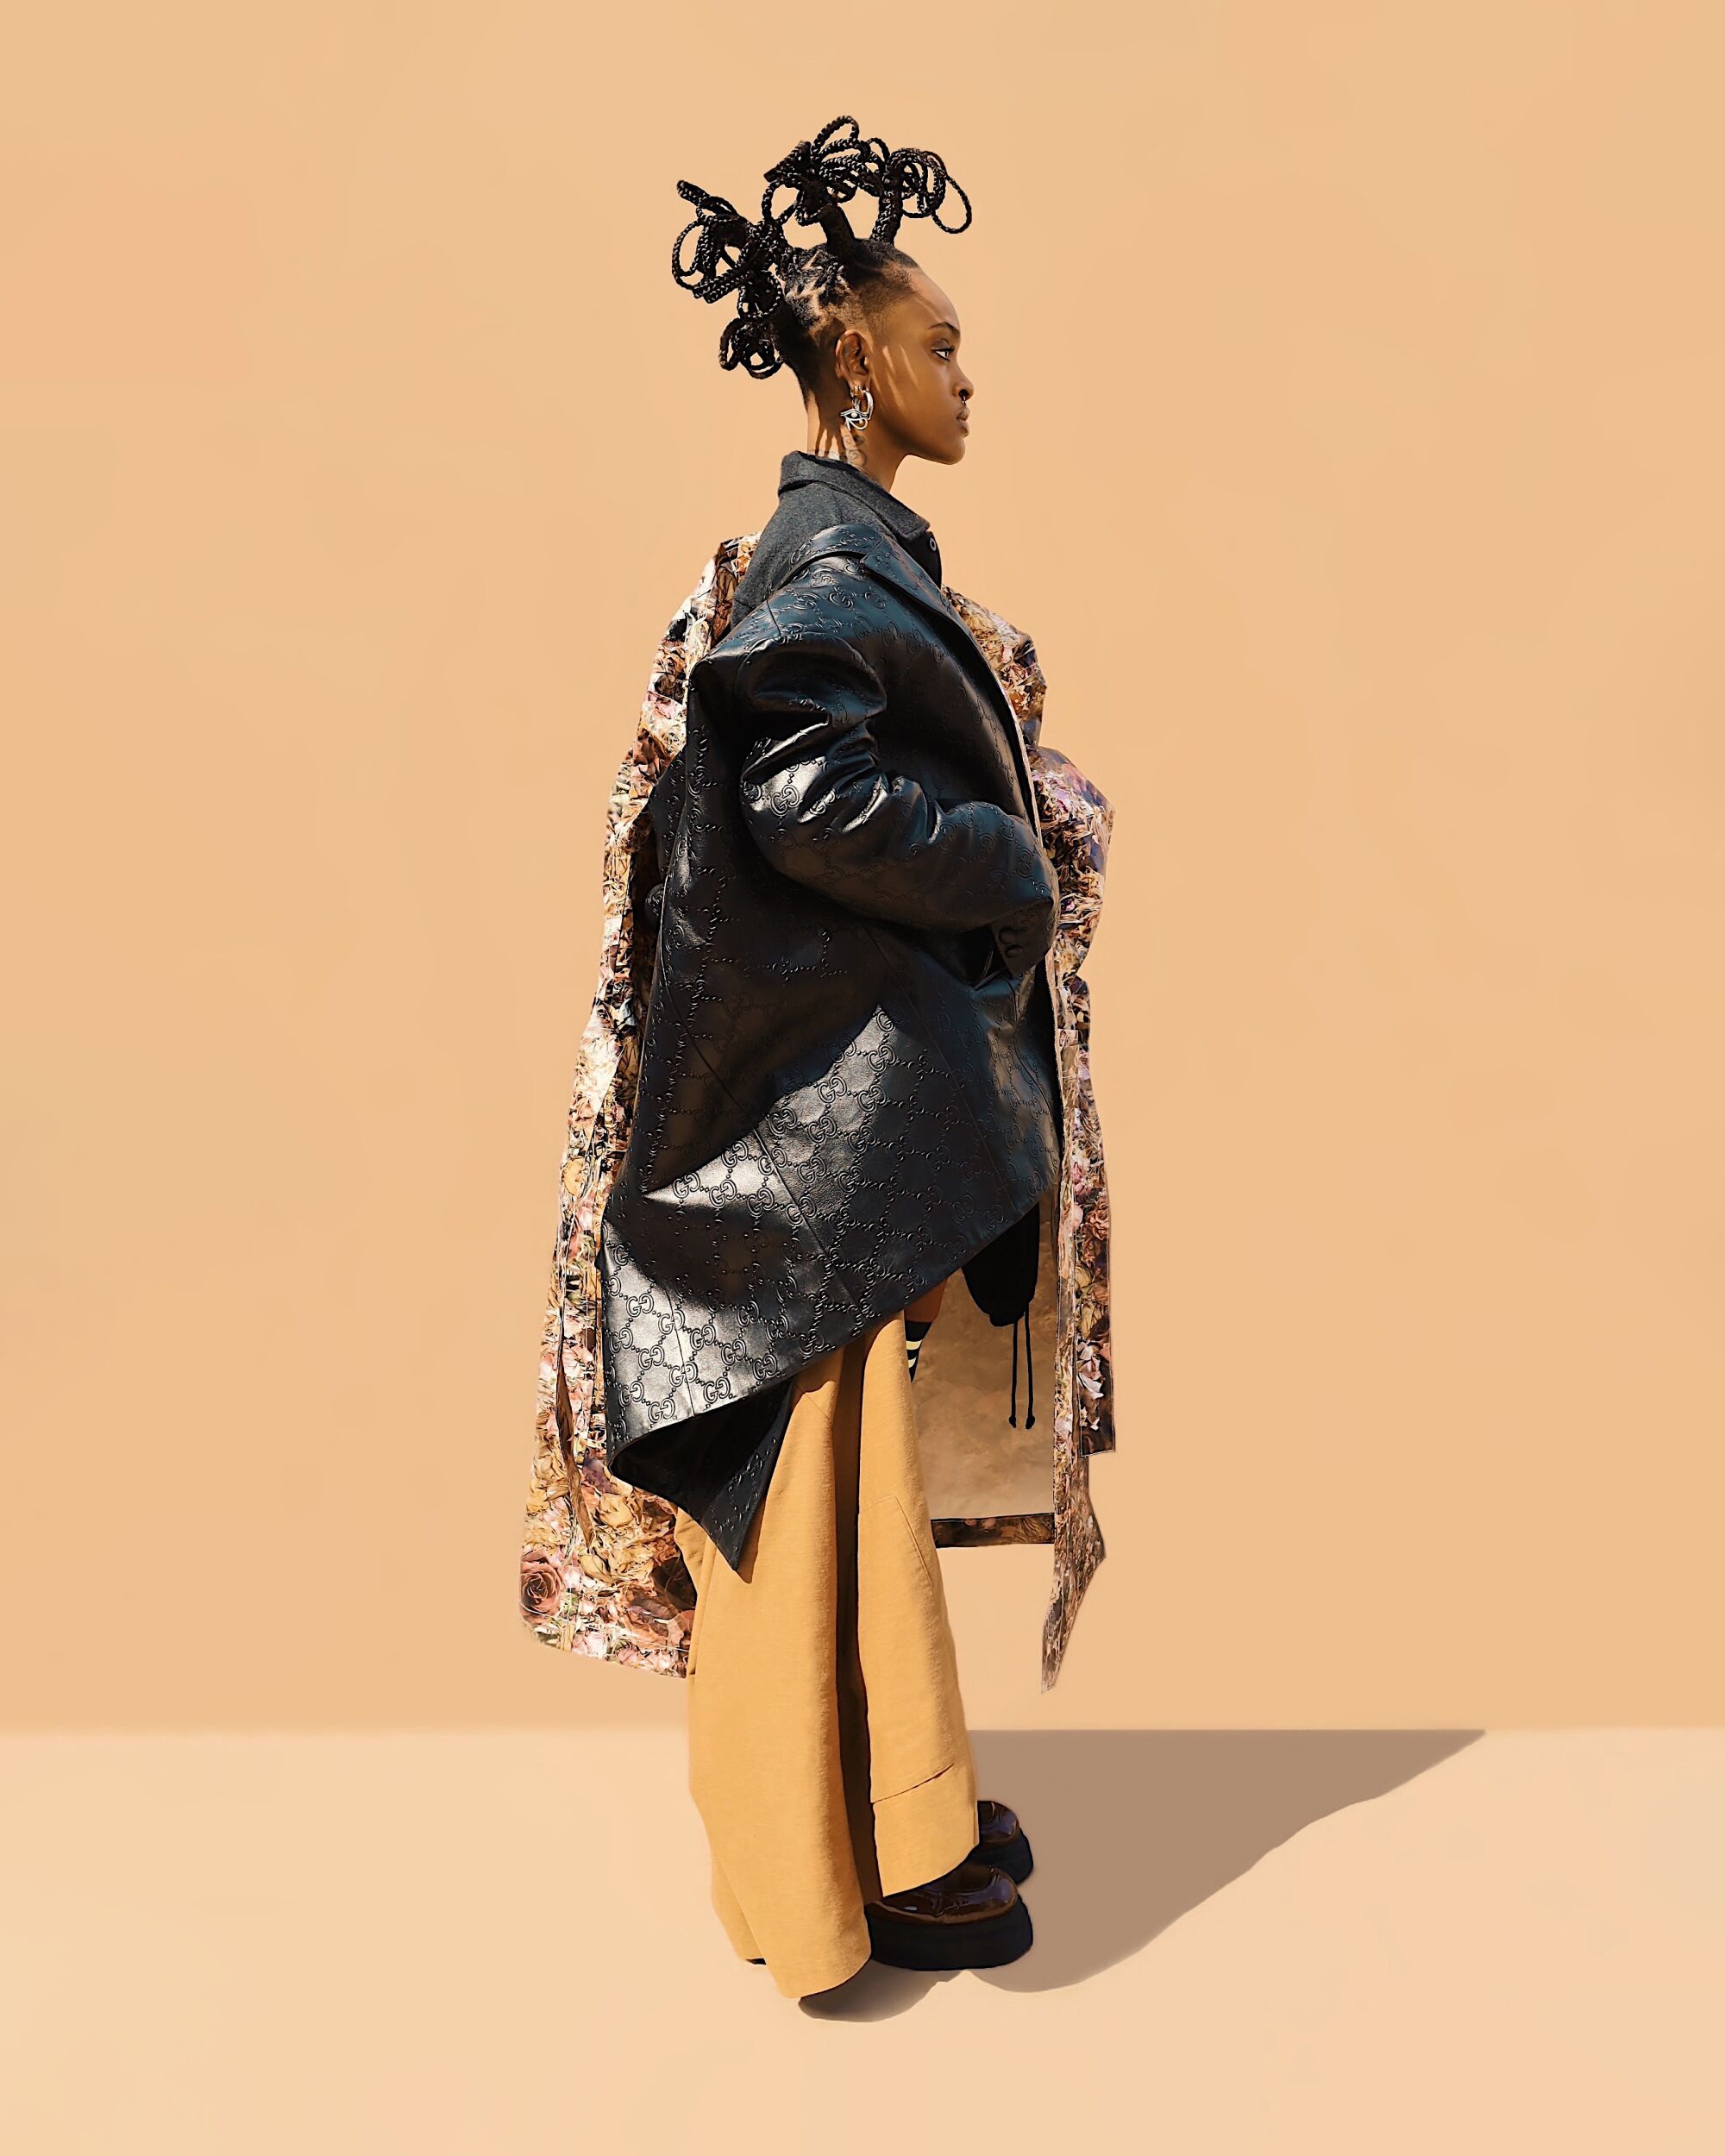 Model Lia Bass stands in front of a light brown backdrop with various high-end jackets draped sculpturally on them